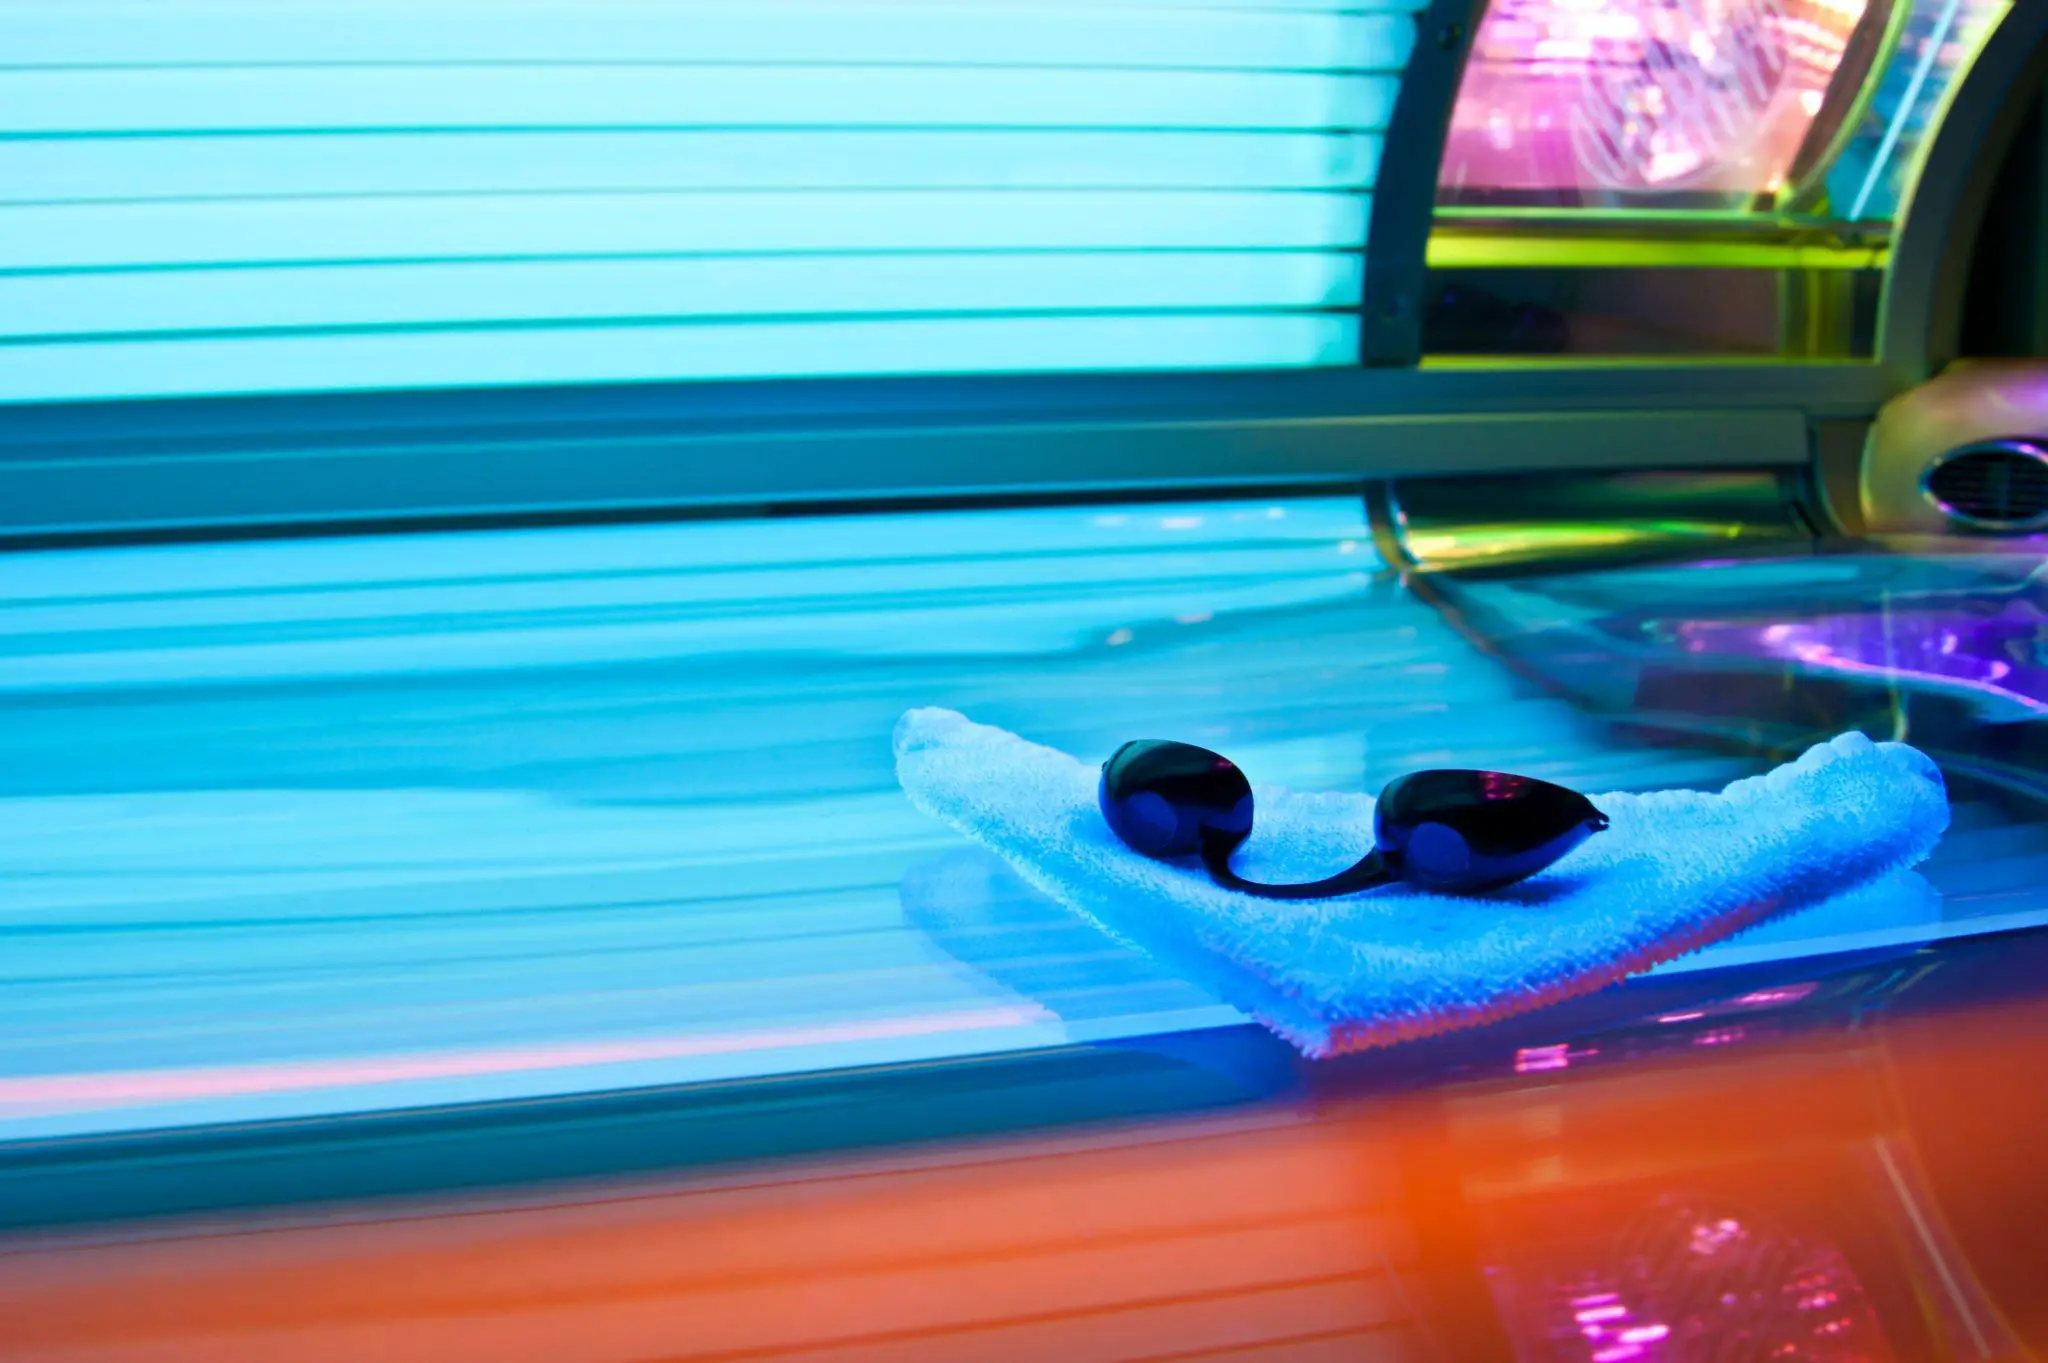 Best Eyewear For Tanning Beds